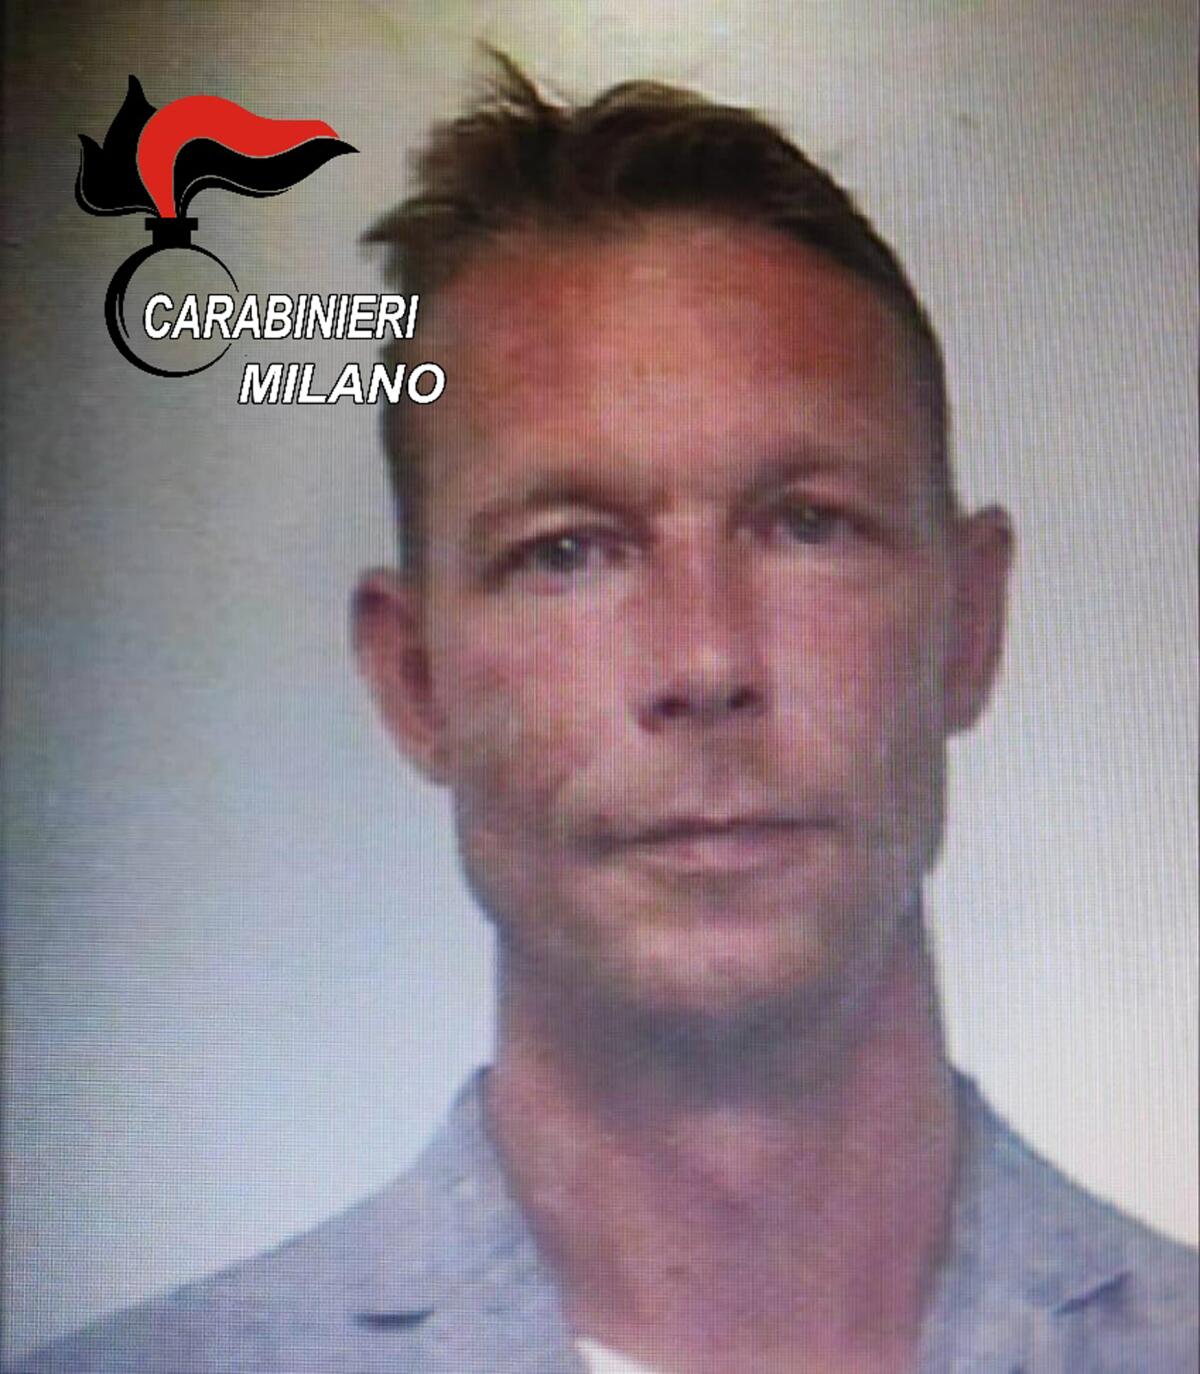 FILE - This image distributed on June 8, 2020, by Carabinieri (Italian paramilitary police), shows a man identified as Christian Brueckner, at the time of his arrest in 2018, under an international warrant for drug trafficking and on charges of other crimes. German prosecutors on Tuesday Oct. 11, 2022 charged a 45-year-old German man, who is also a suspect in the disappearance of British toddler Madeleine McCann, with several sexual offenses he is alleged to have committed in Portugal between 2000 and 2017. (Carabinieri via AP, File)